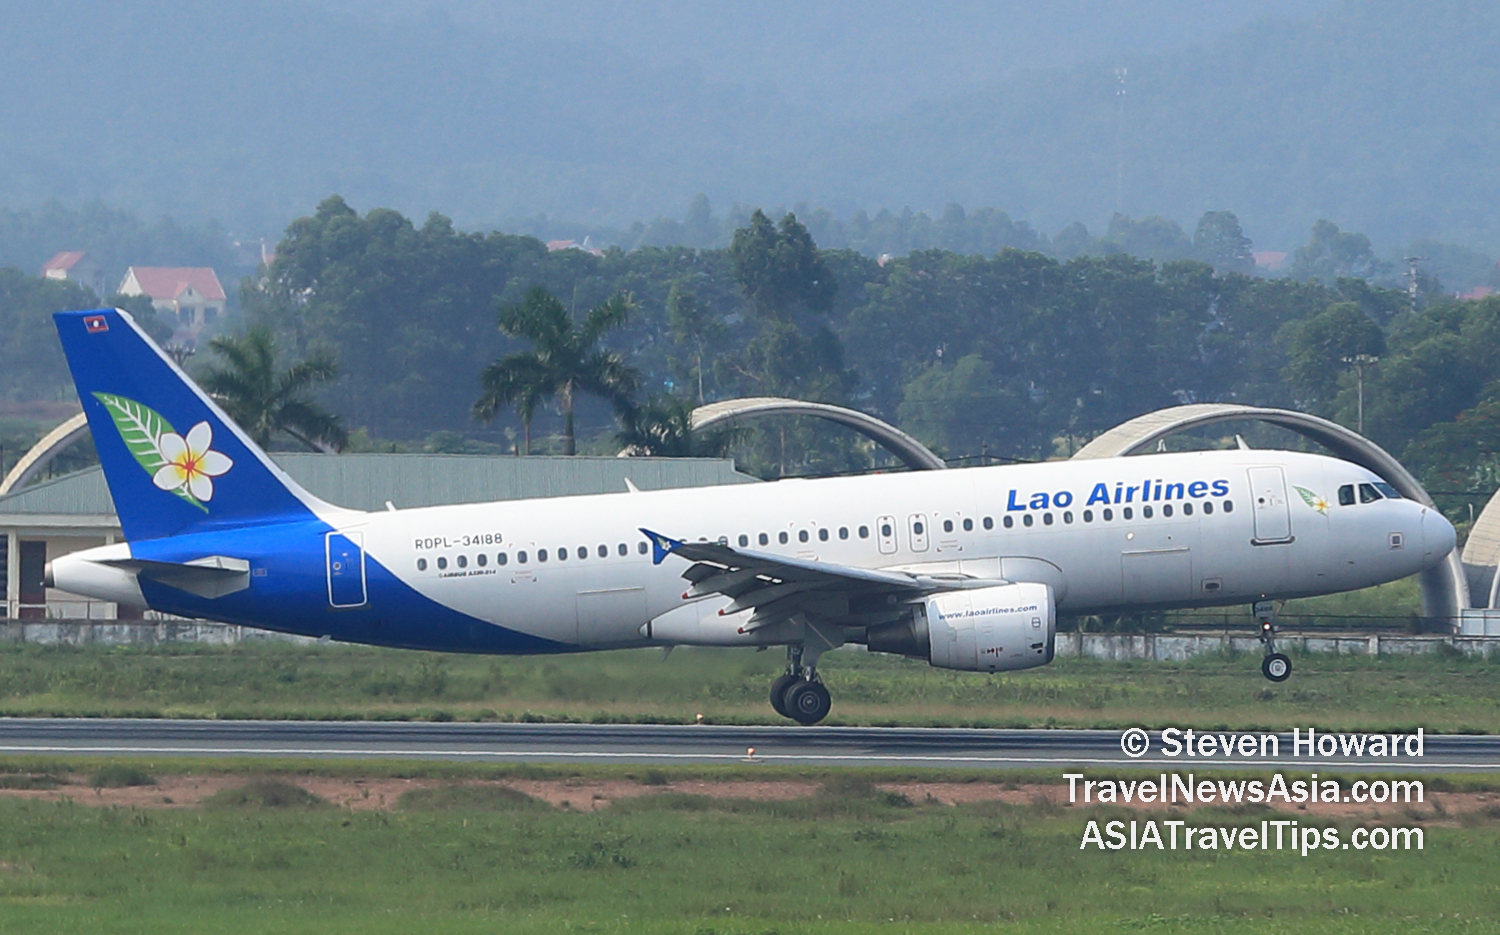 Lao Airlines Airbus A320 reg: RDPL-34188. Picture by Steven Howard of TravelNewsAsia.com Click to enlarge.